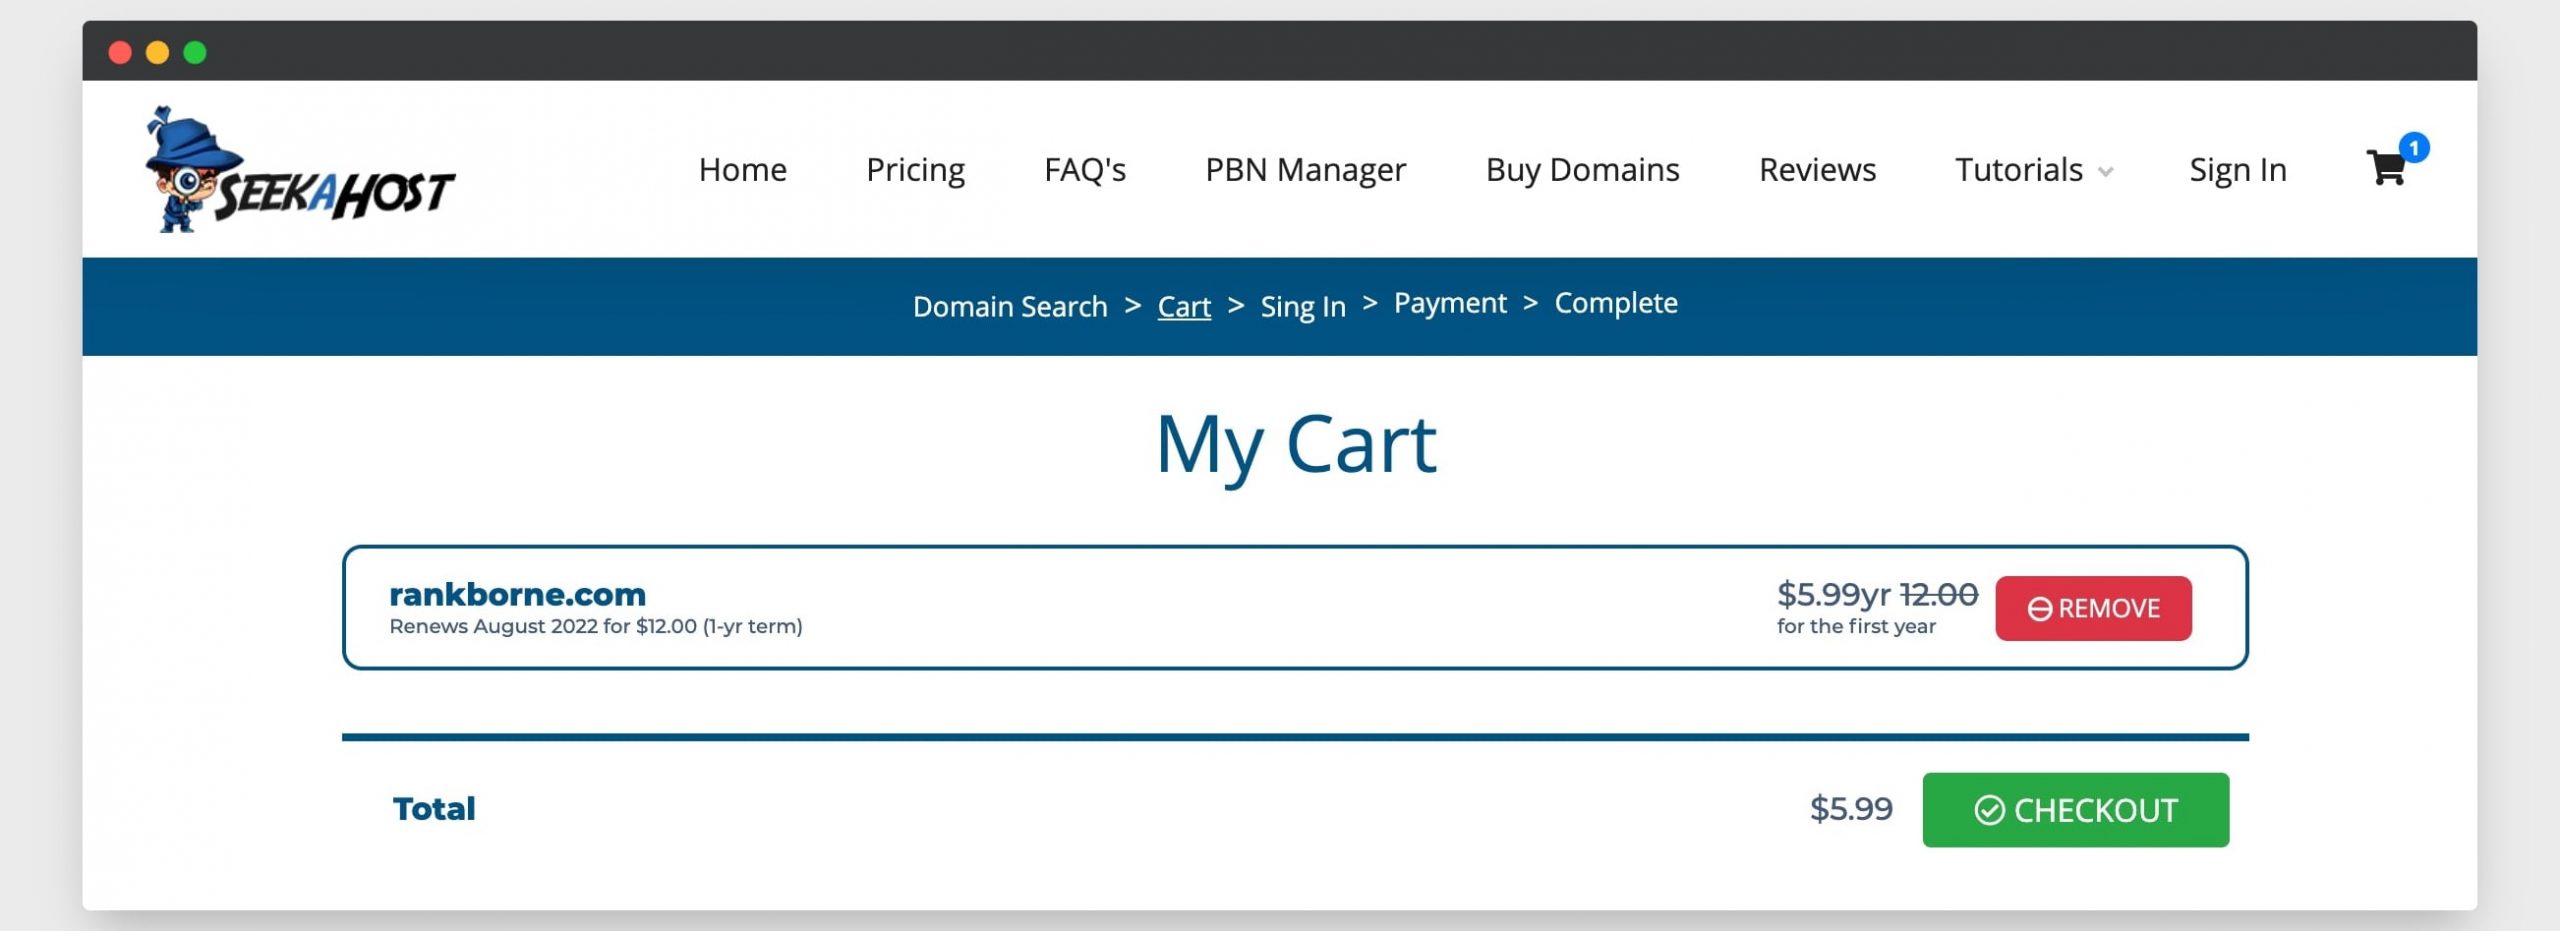 domains in the cart